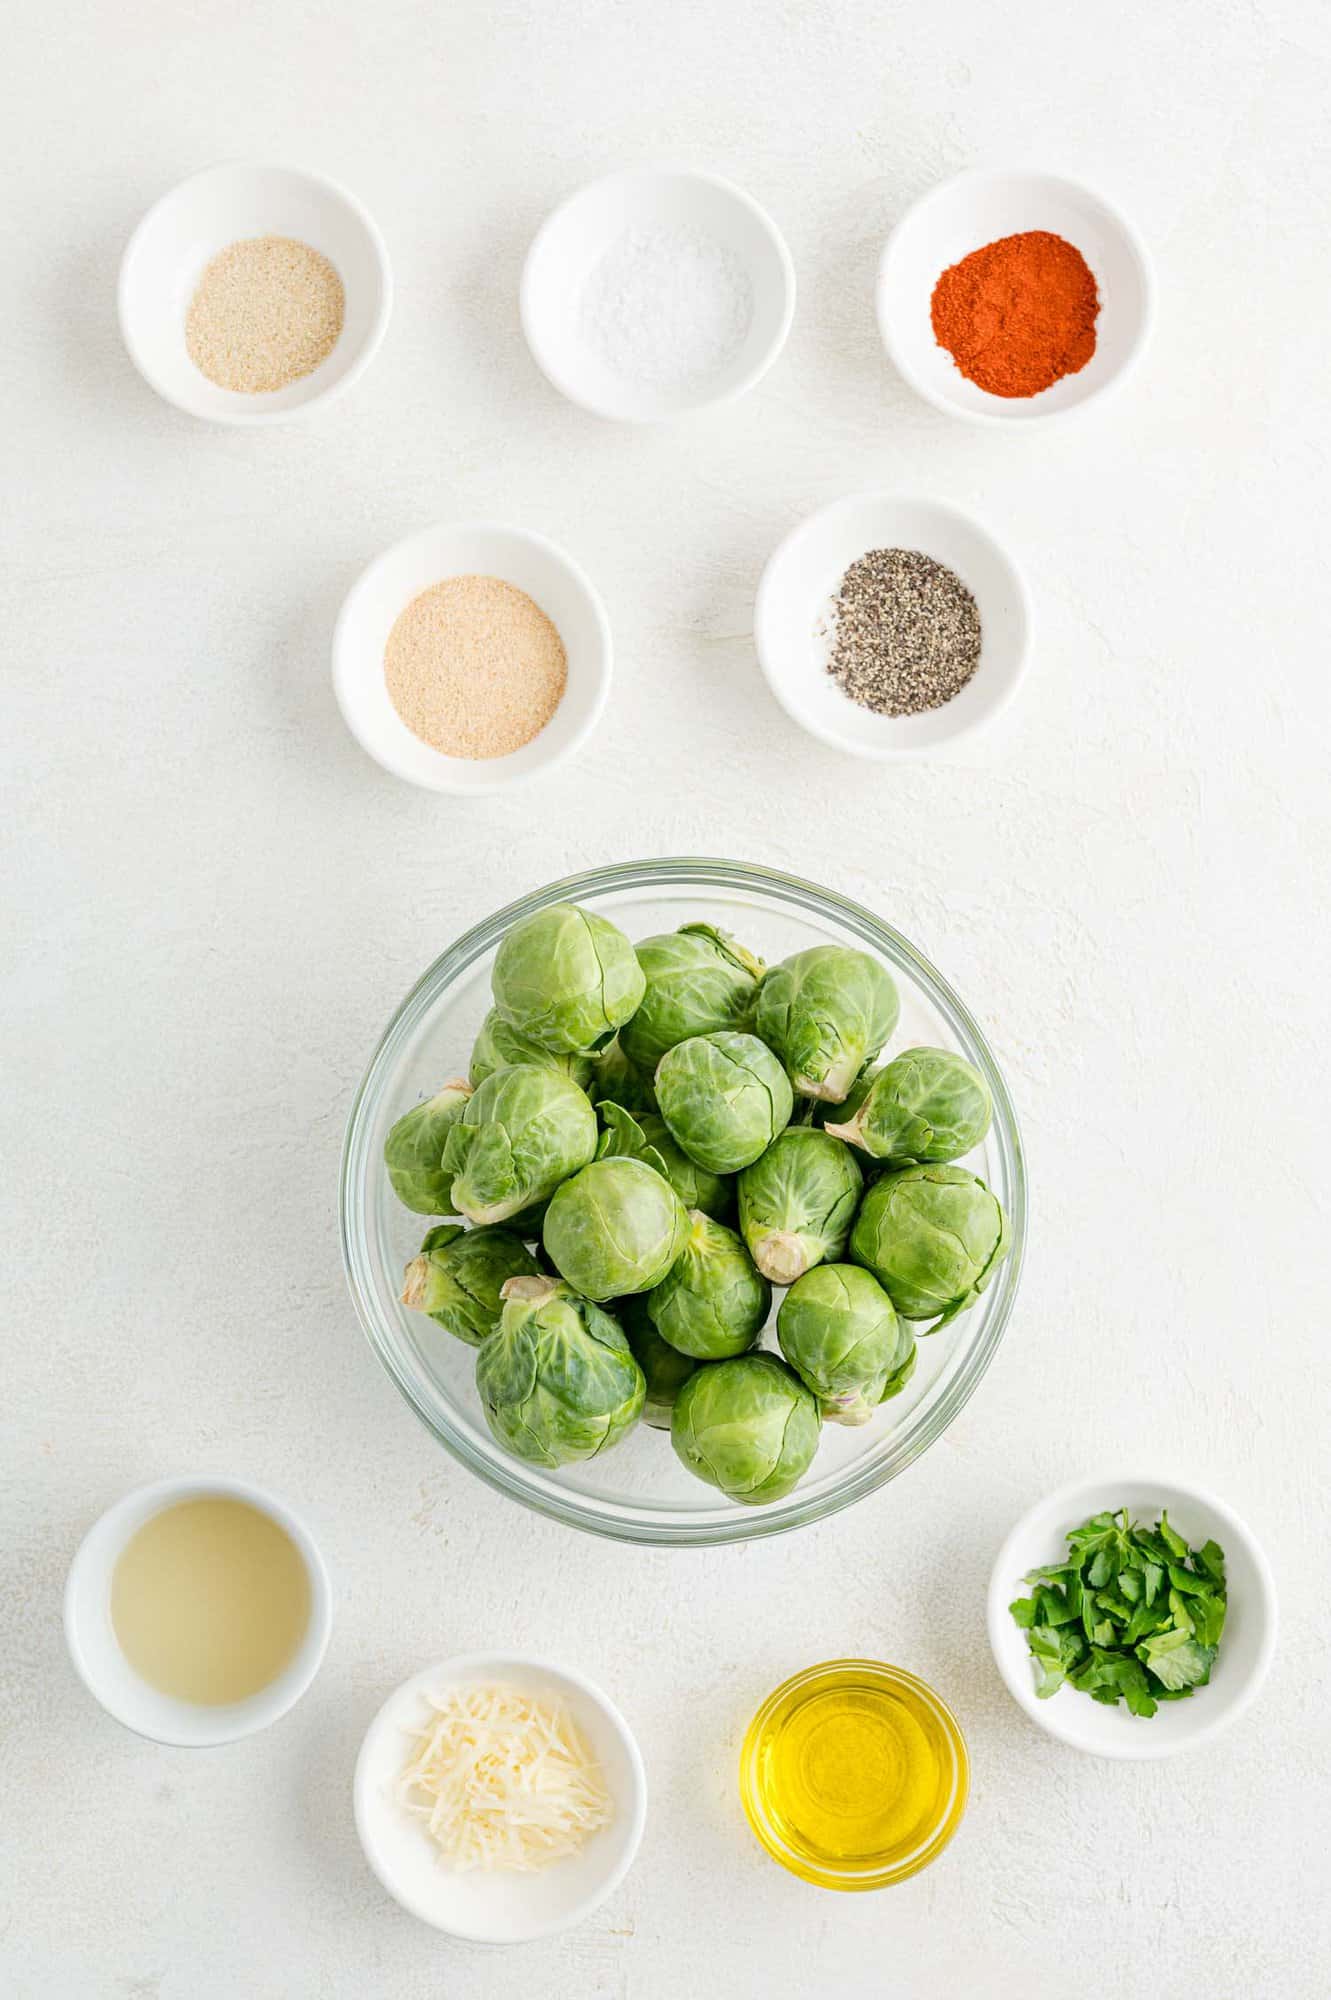 The ingredients for grilled Brussels sprouts.